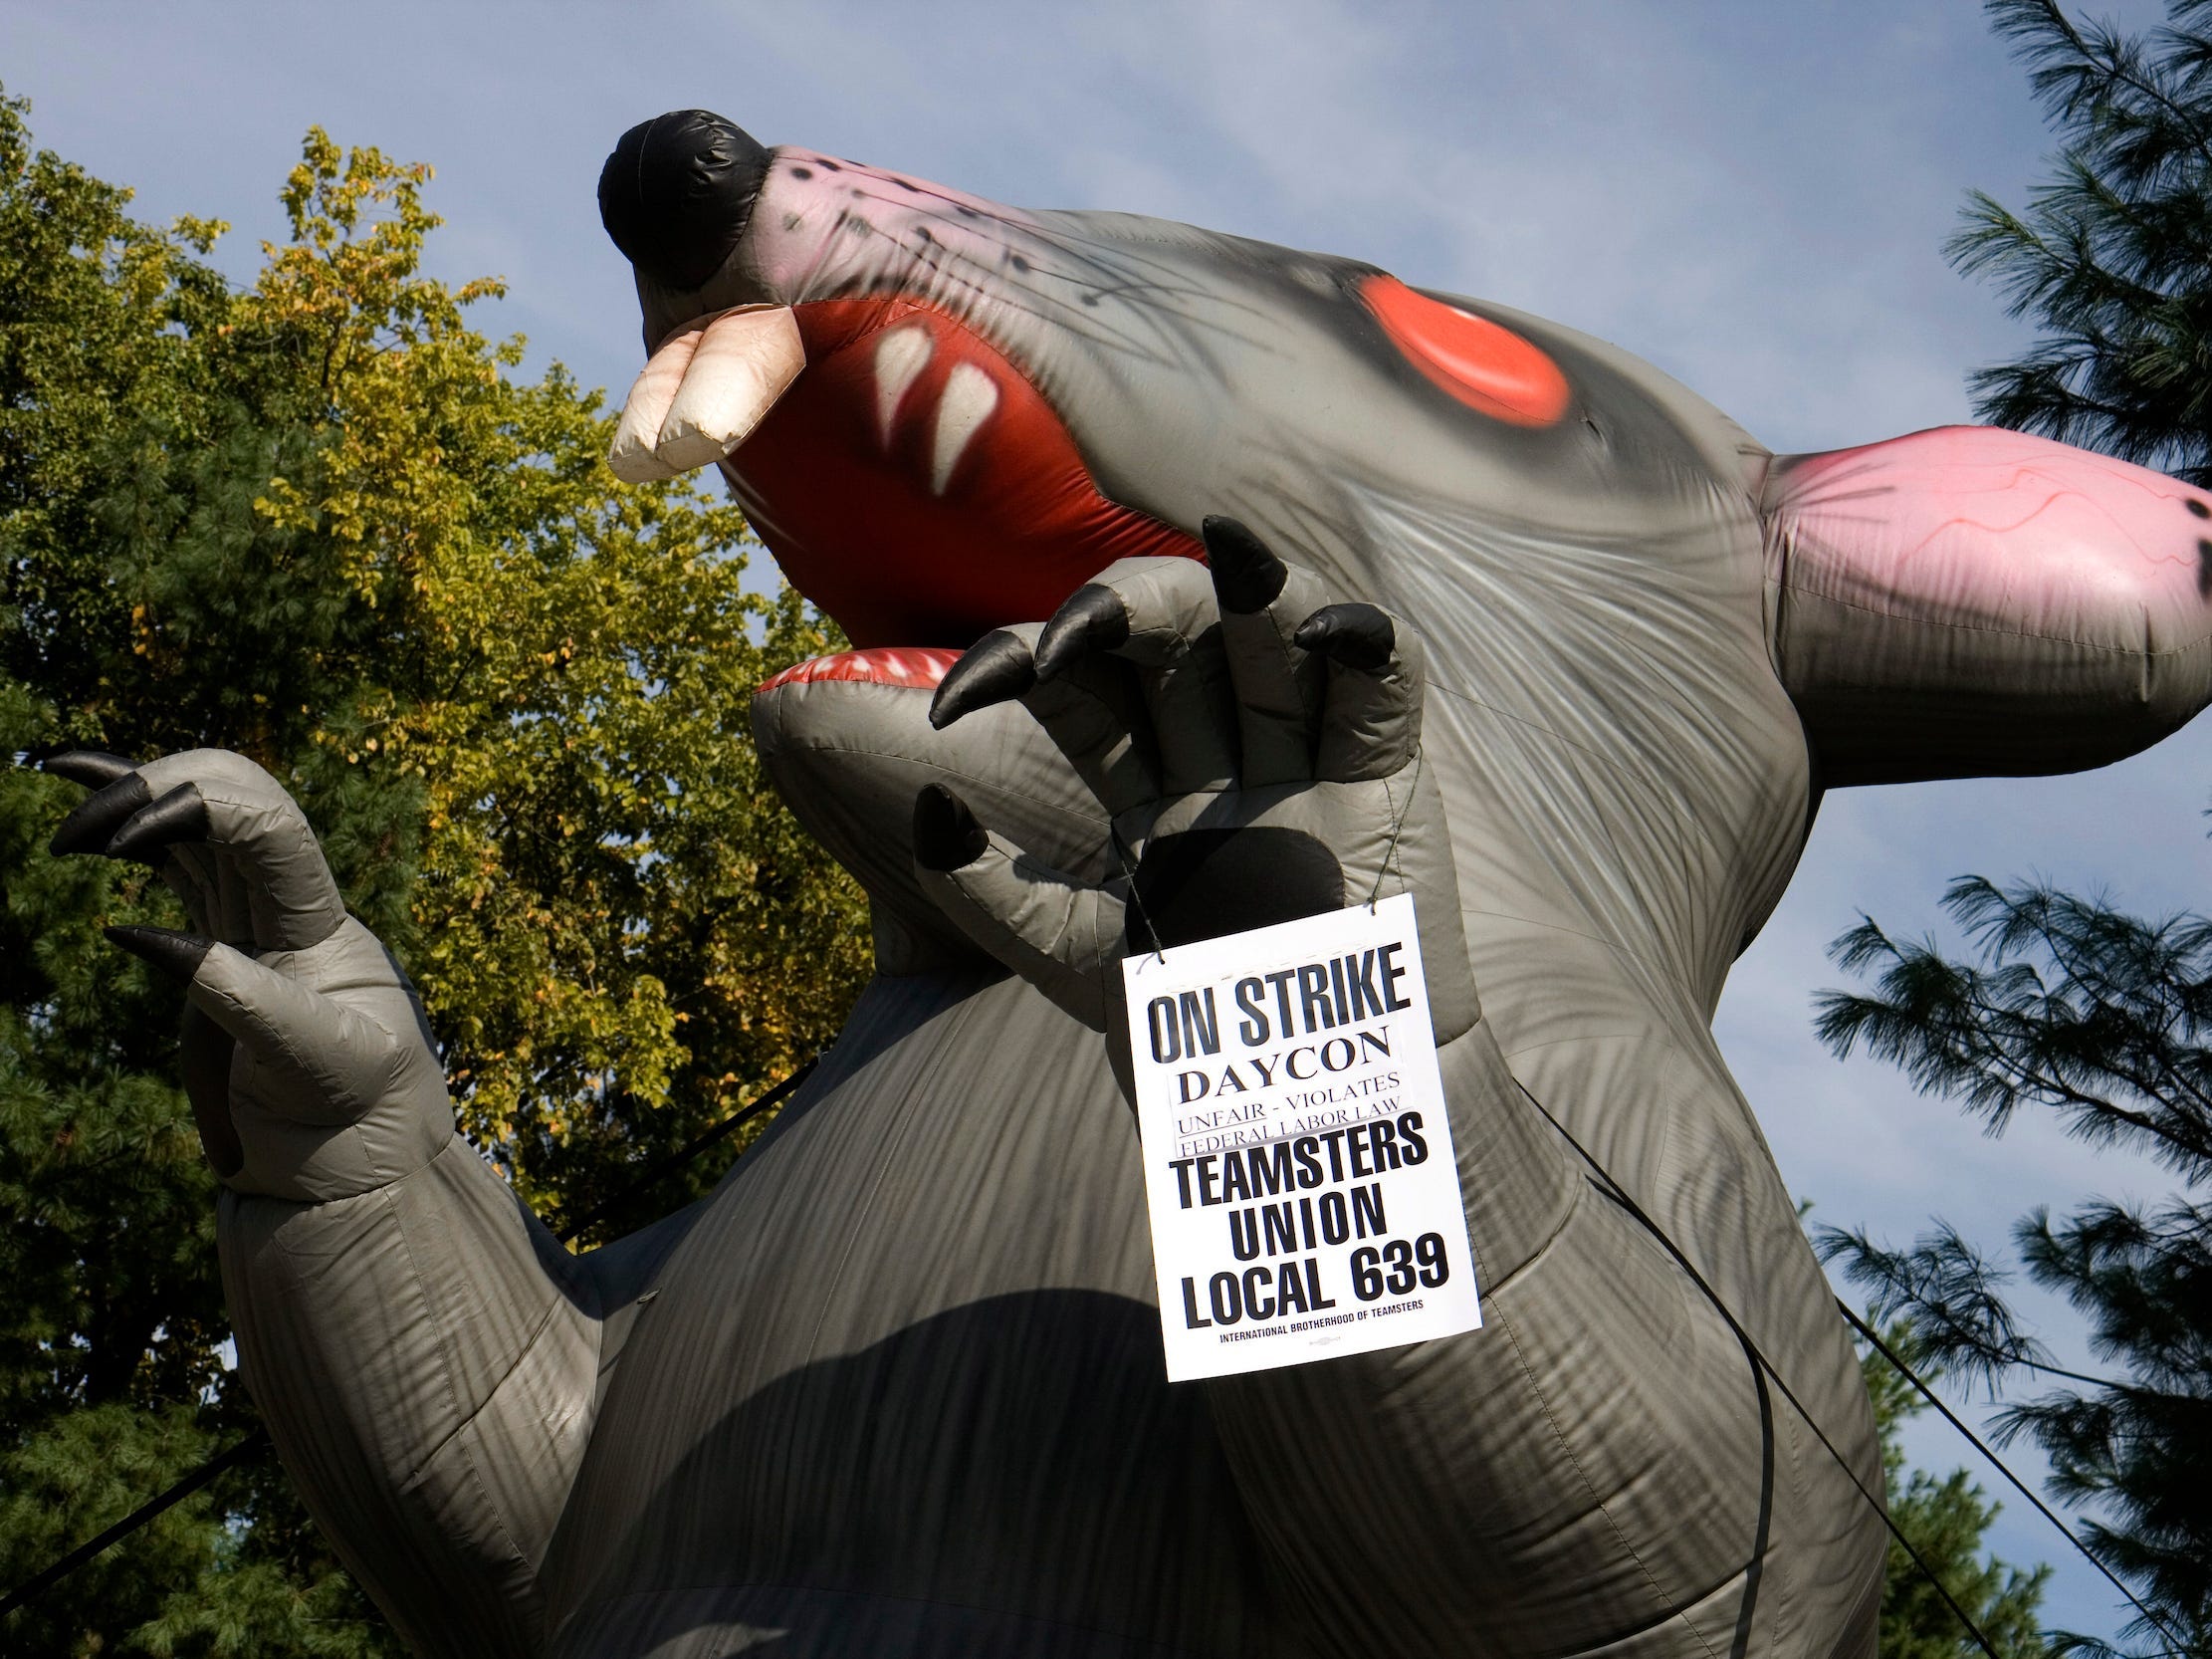 "Scabby the Rat" is a fixture at labor disputes, first deployed in 1990 by a union in Chicago.